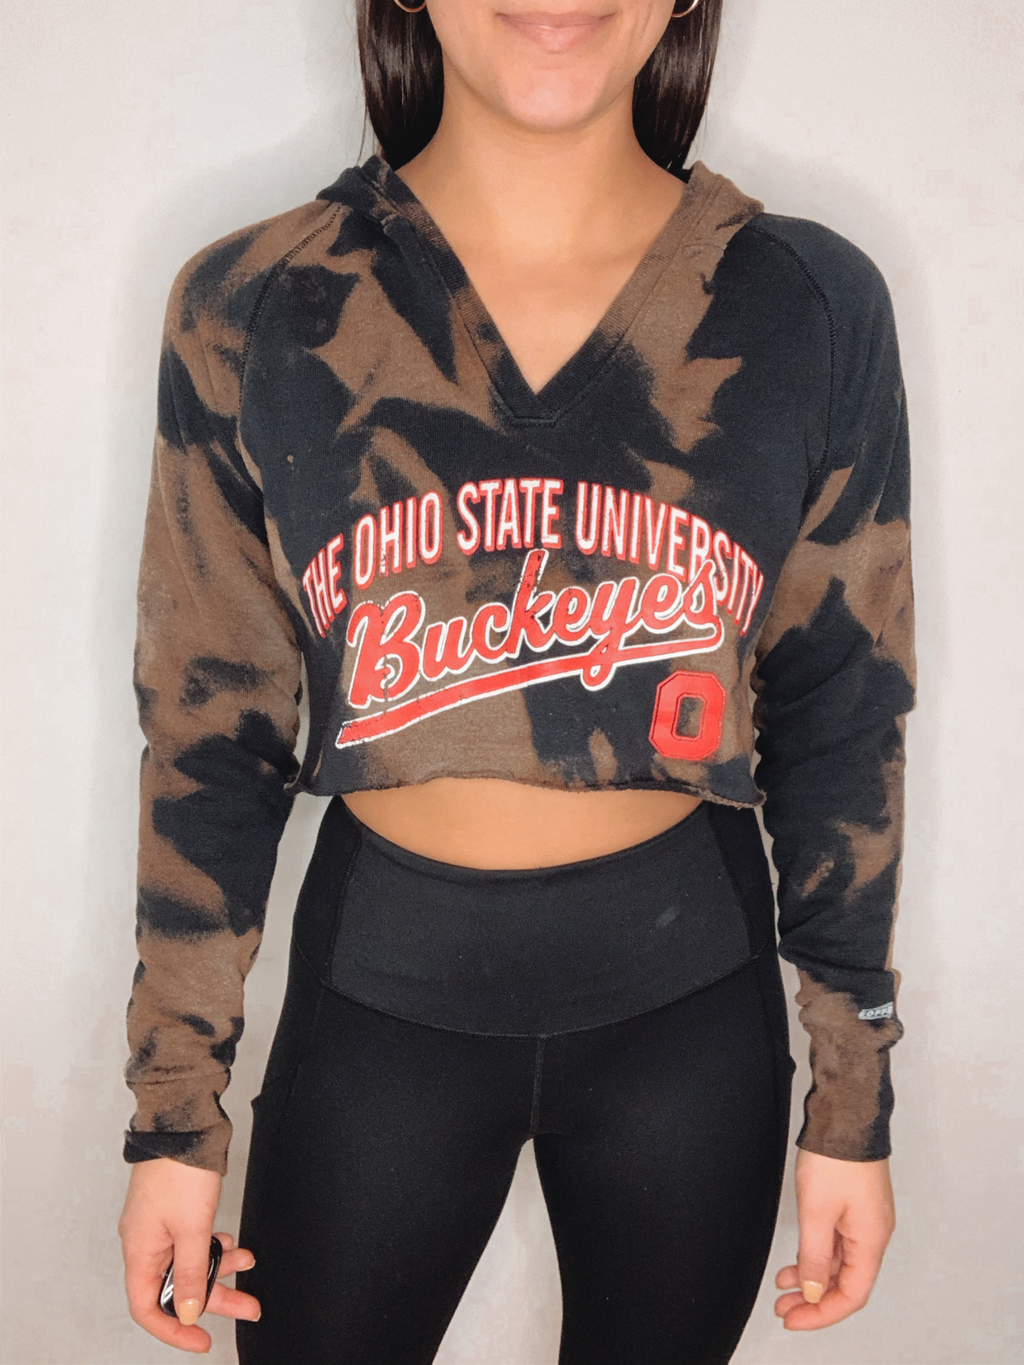 Ohio State Cropped Bleached Sweatshirt